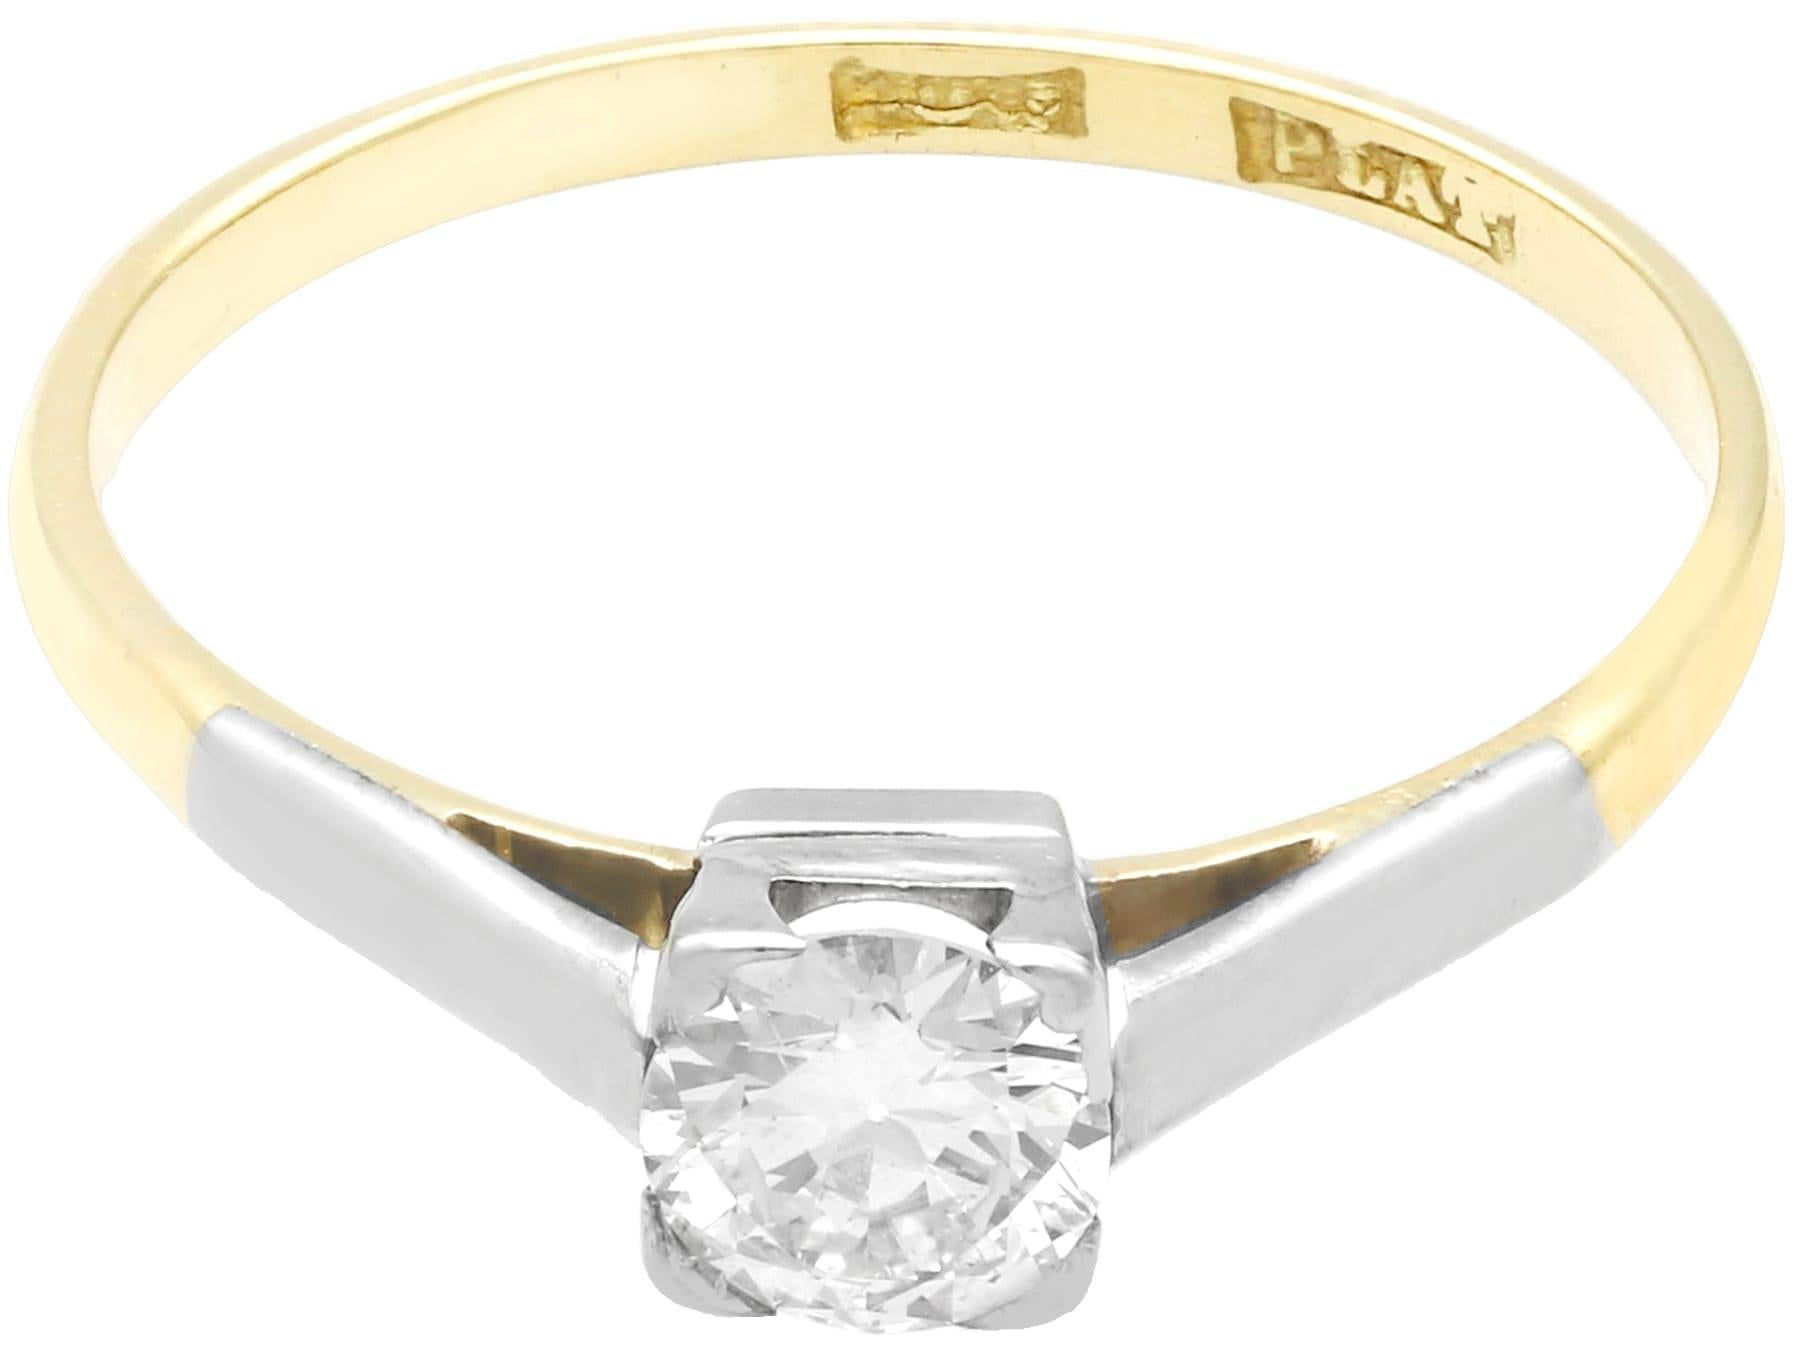 A fine and impressive 0.60 carat diamond and 18k yellow gold, platinum set solitaire ring; part of our diverse antique jewelry and estate jewelry collections.

This fine and impressive 1930s engagement ring has been crafted in 18k yellow gold with a